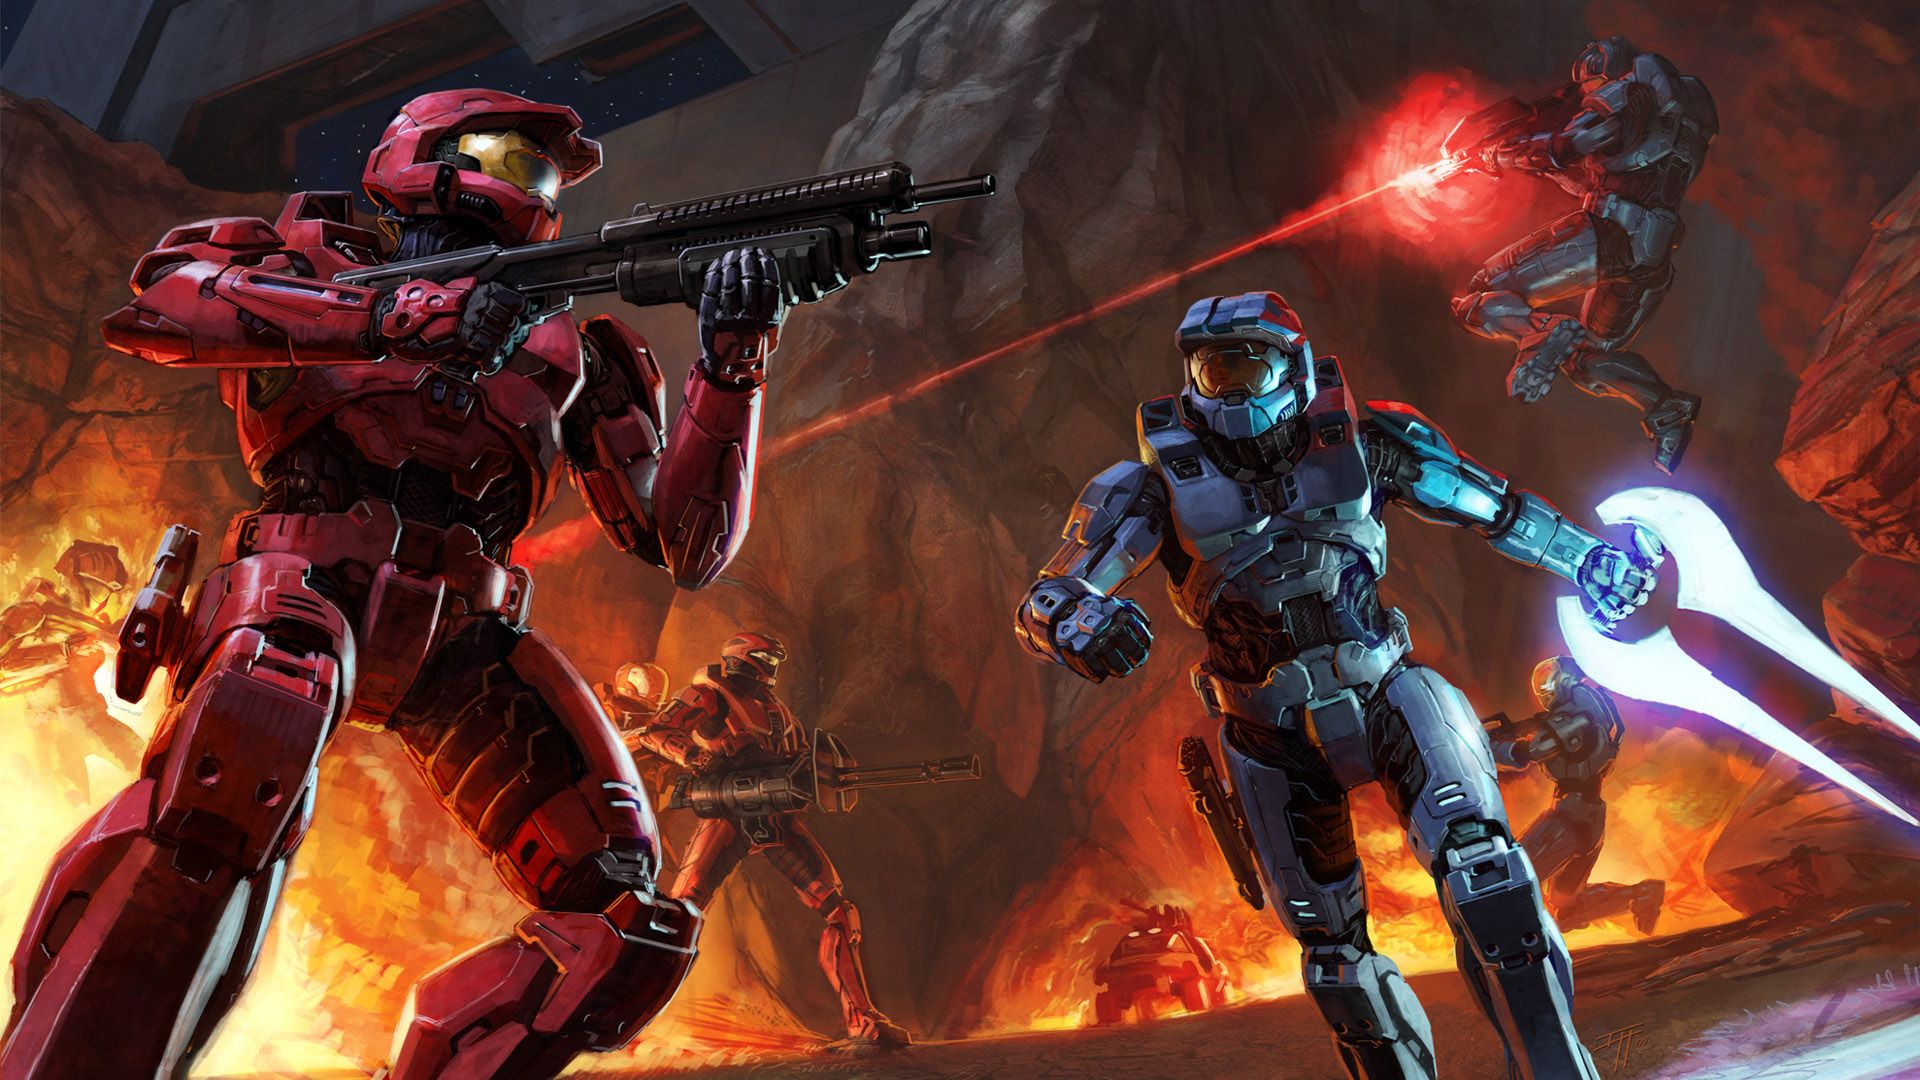 Red vs. Blue' Grew Up with Its Viewers. The Emory Wheel